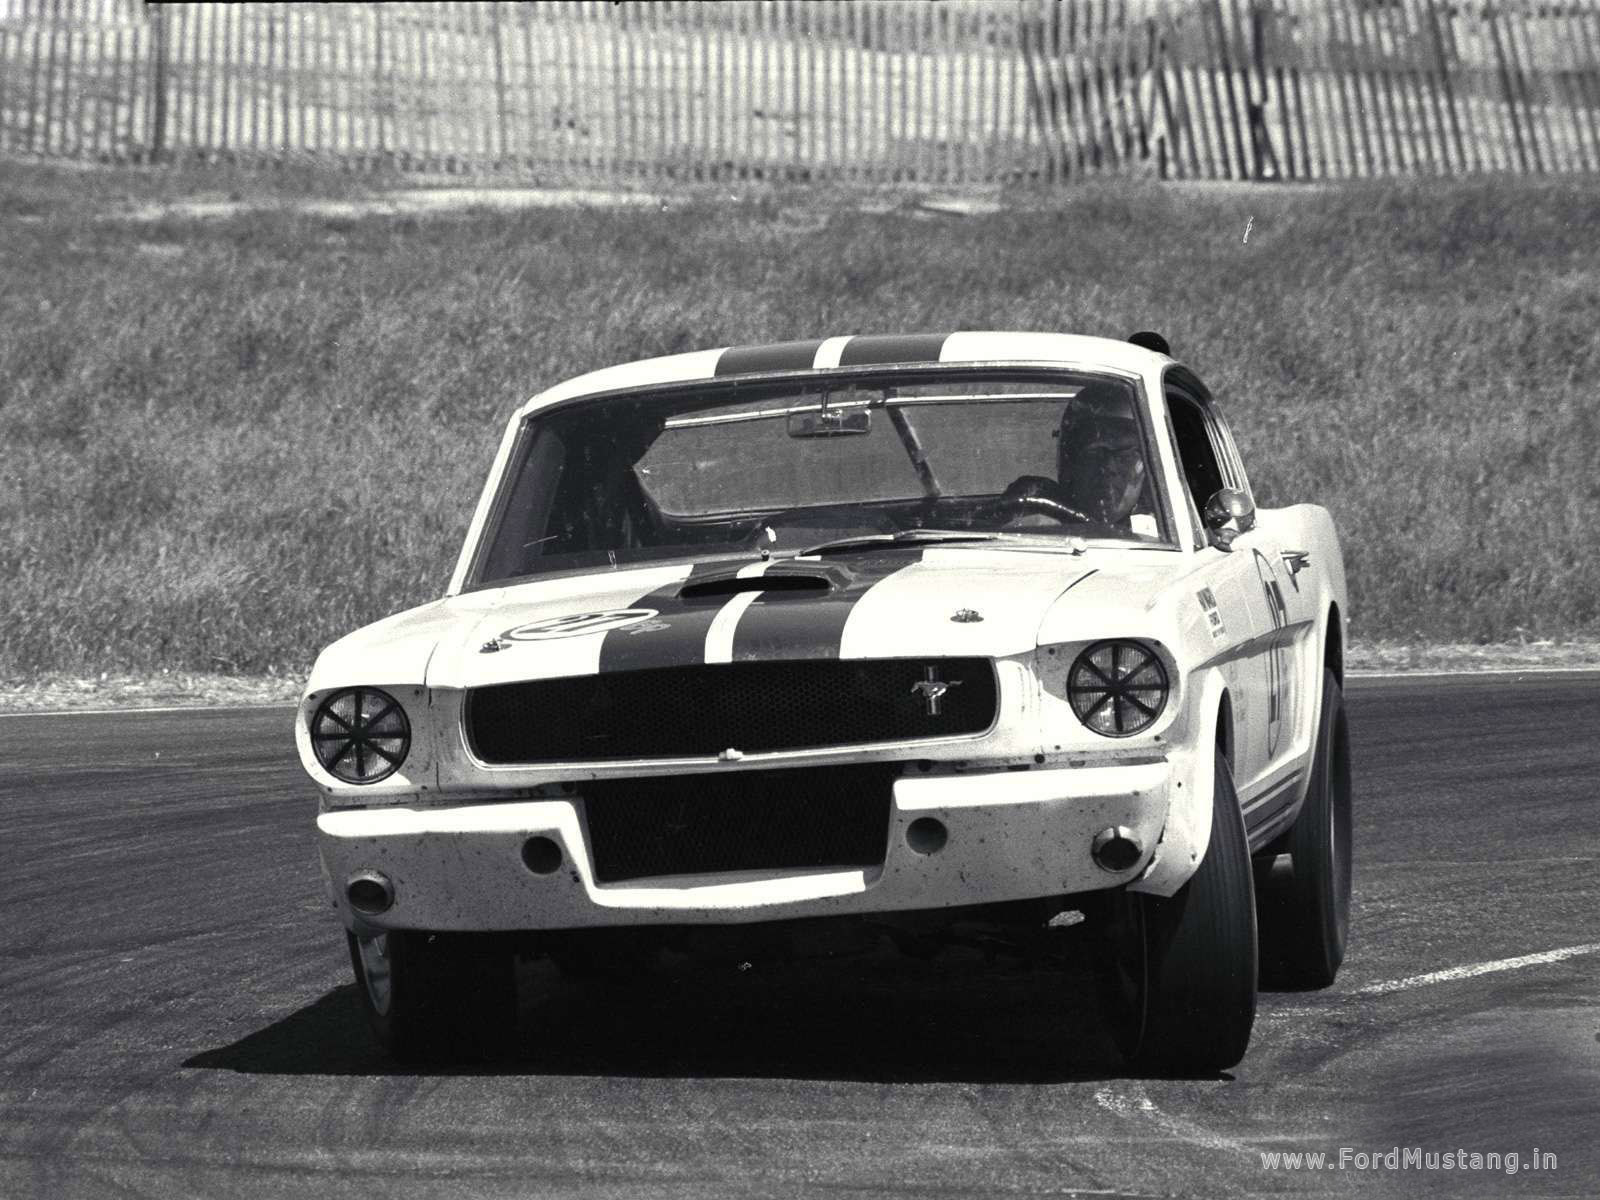 GT350 / Ford Mustang, Ford Mustang Bullitt, Ford Mustang Shelby GT...